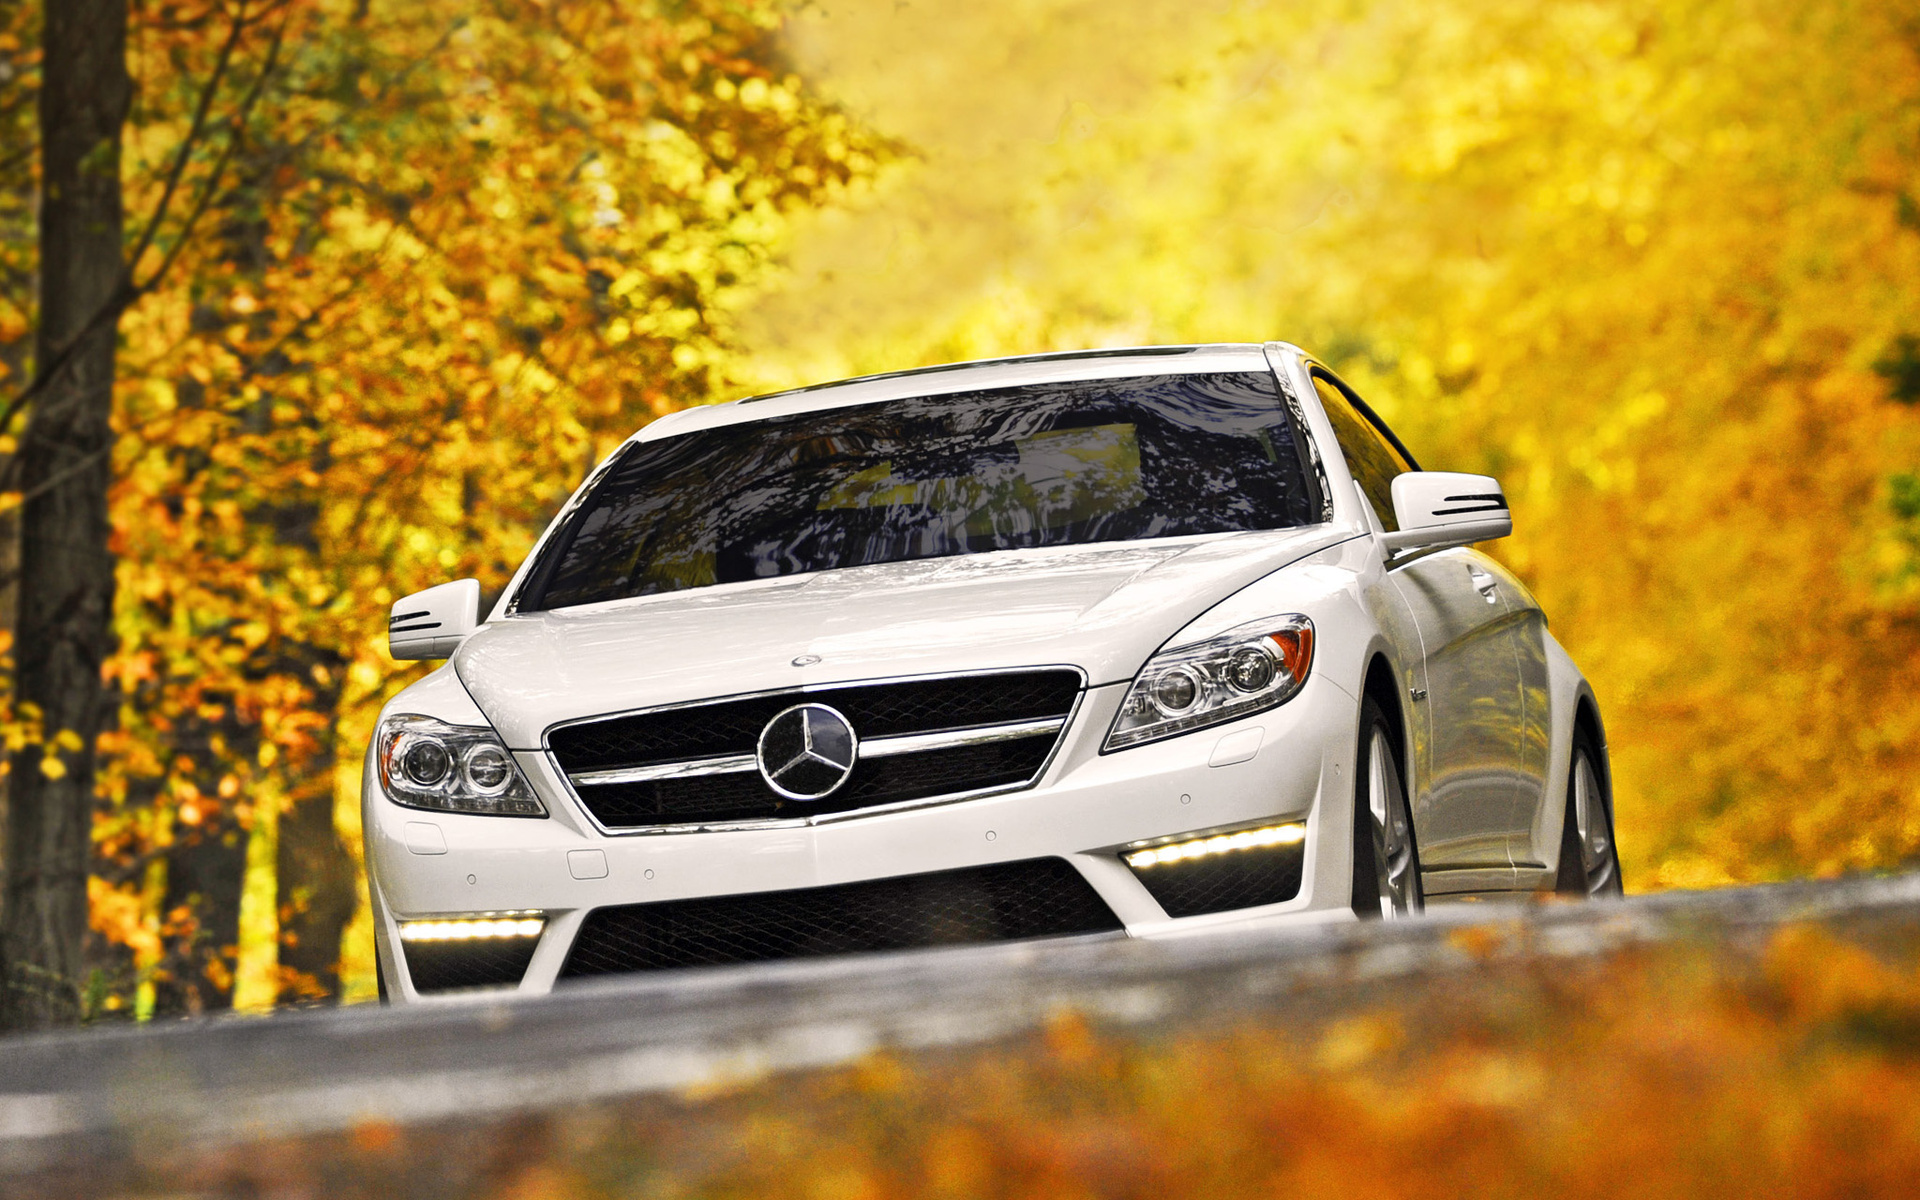 vehicles, Cars, Mercedes, Autumn, Fall Wallpaper HD / Desktop and Mobile Background